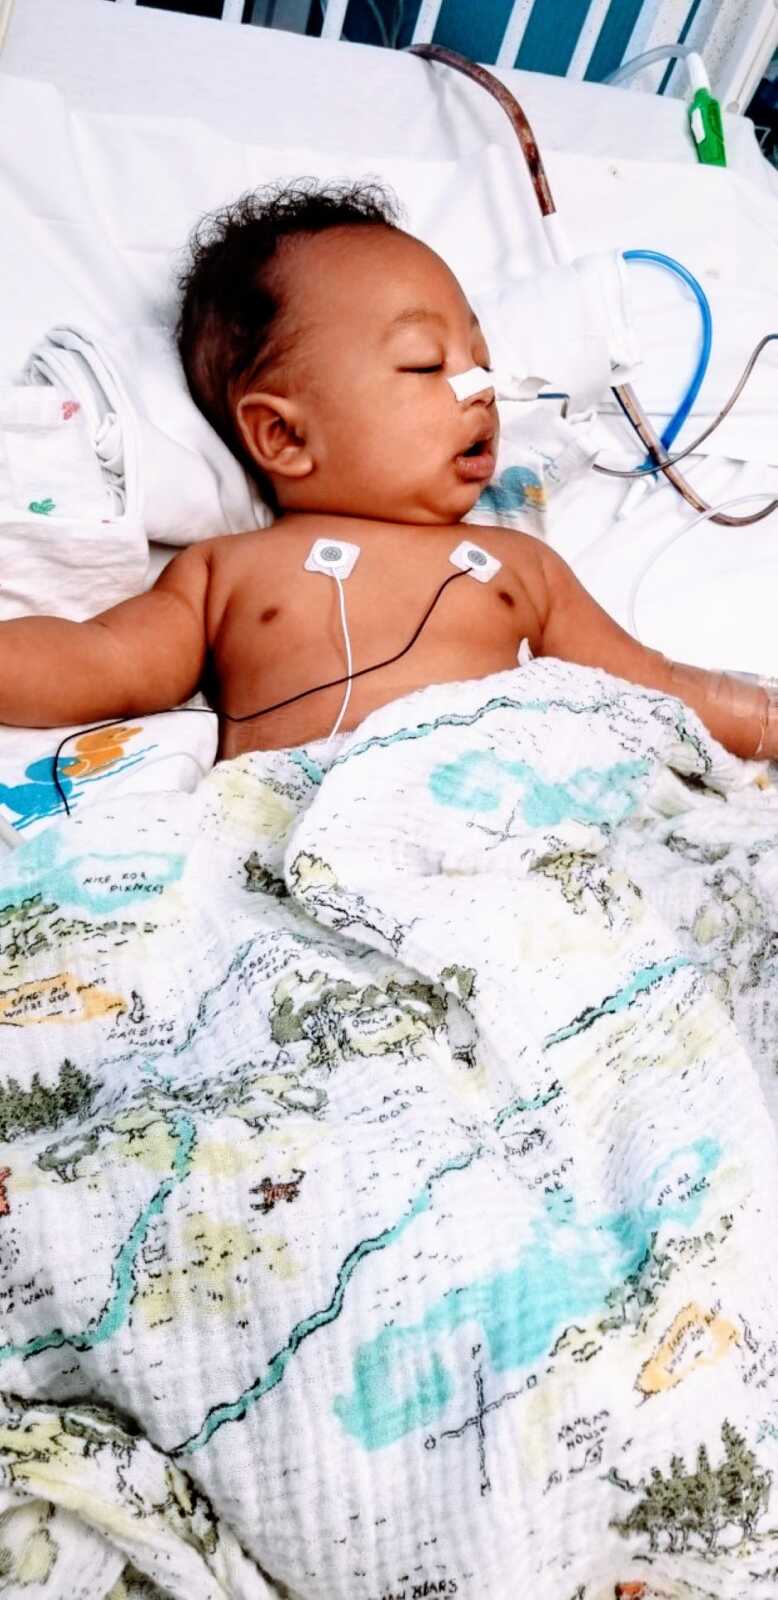 Little boy sleeps in the hospital while attached to monitors